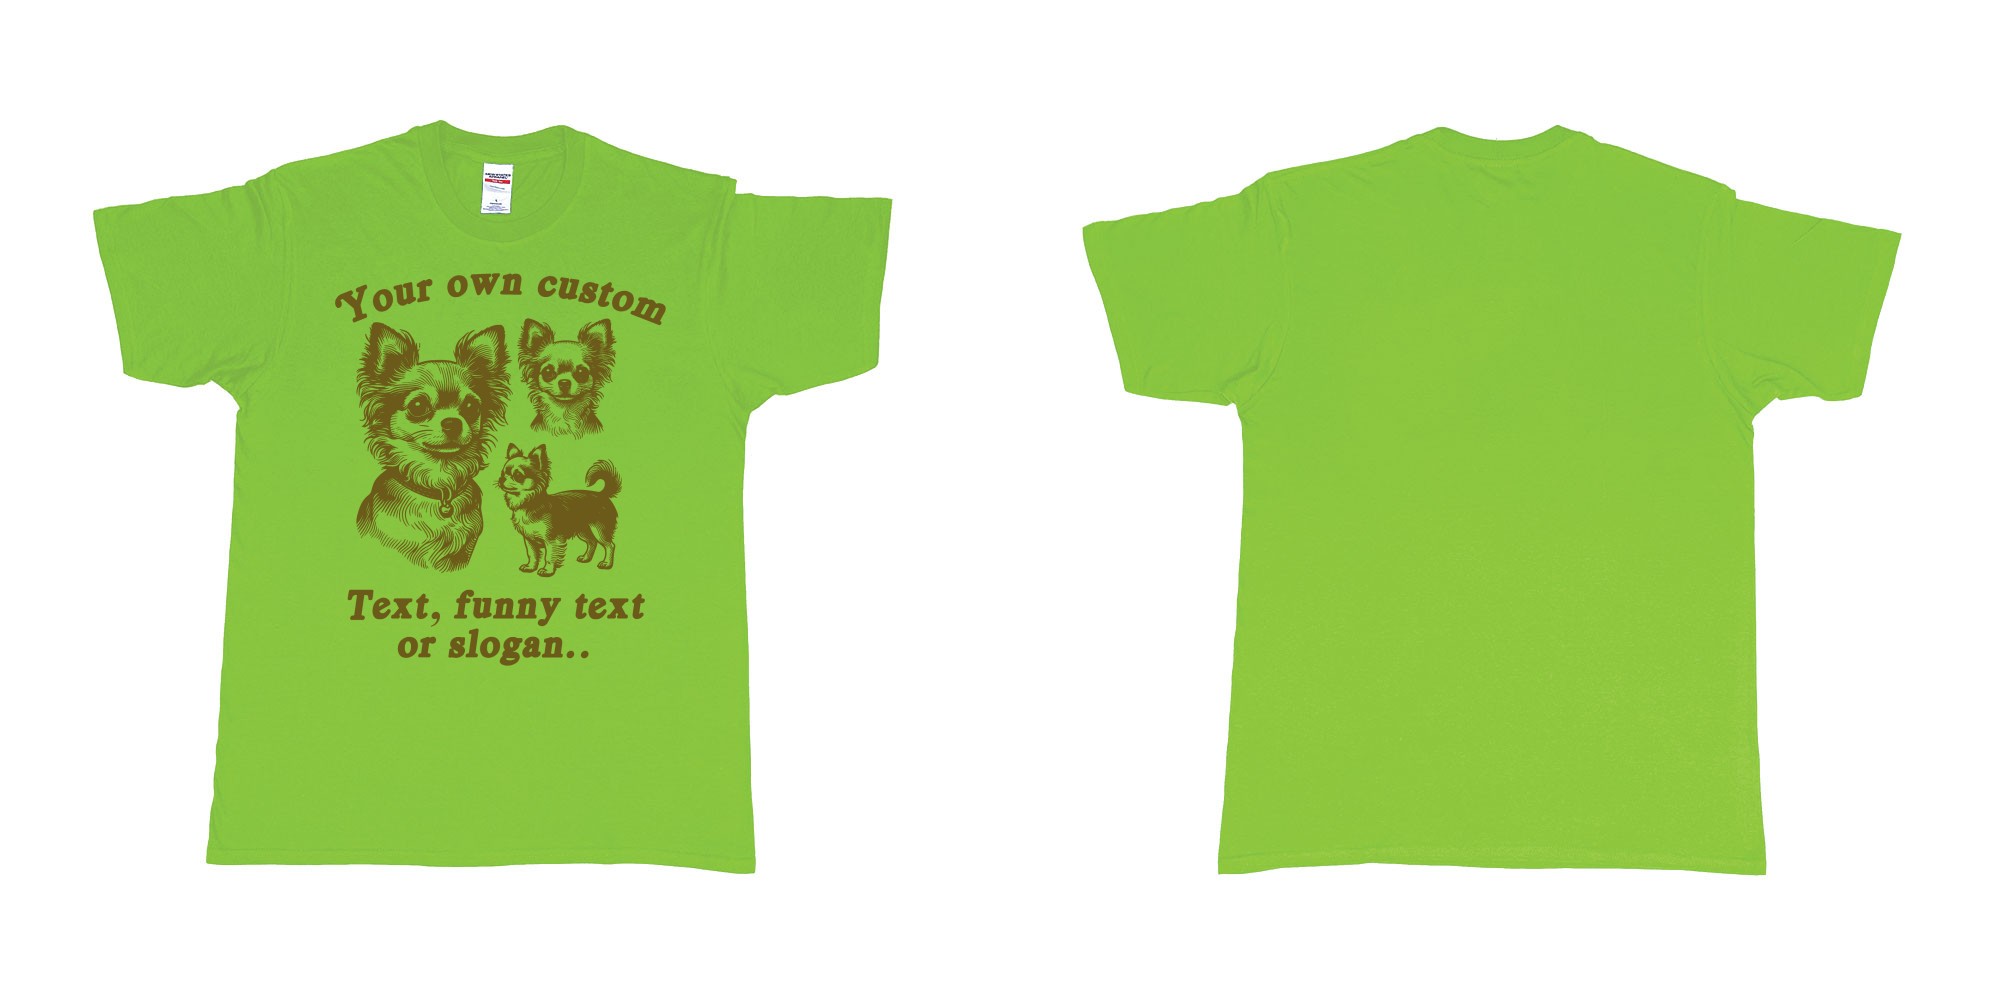 Custom tshirt design chiwawa dogs drawing custom own text printing in fabric color lime choice your own text made in Bali by The Pirate Way